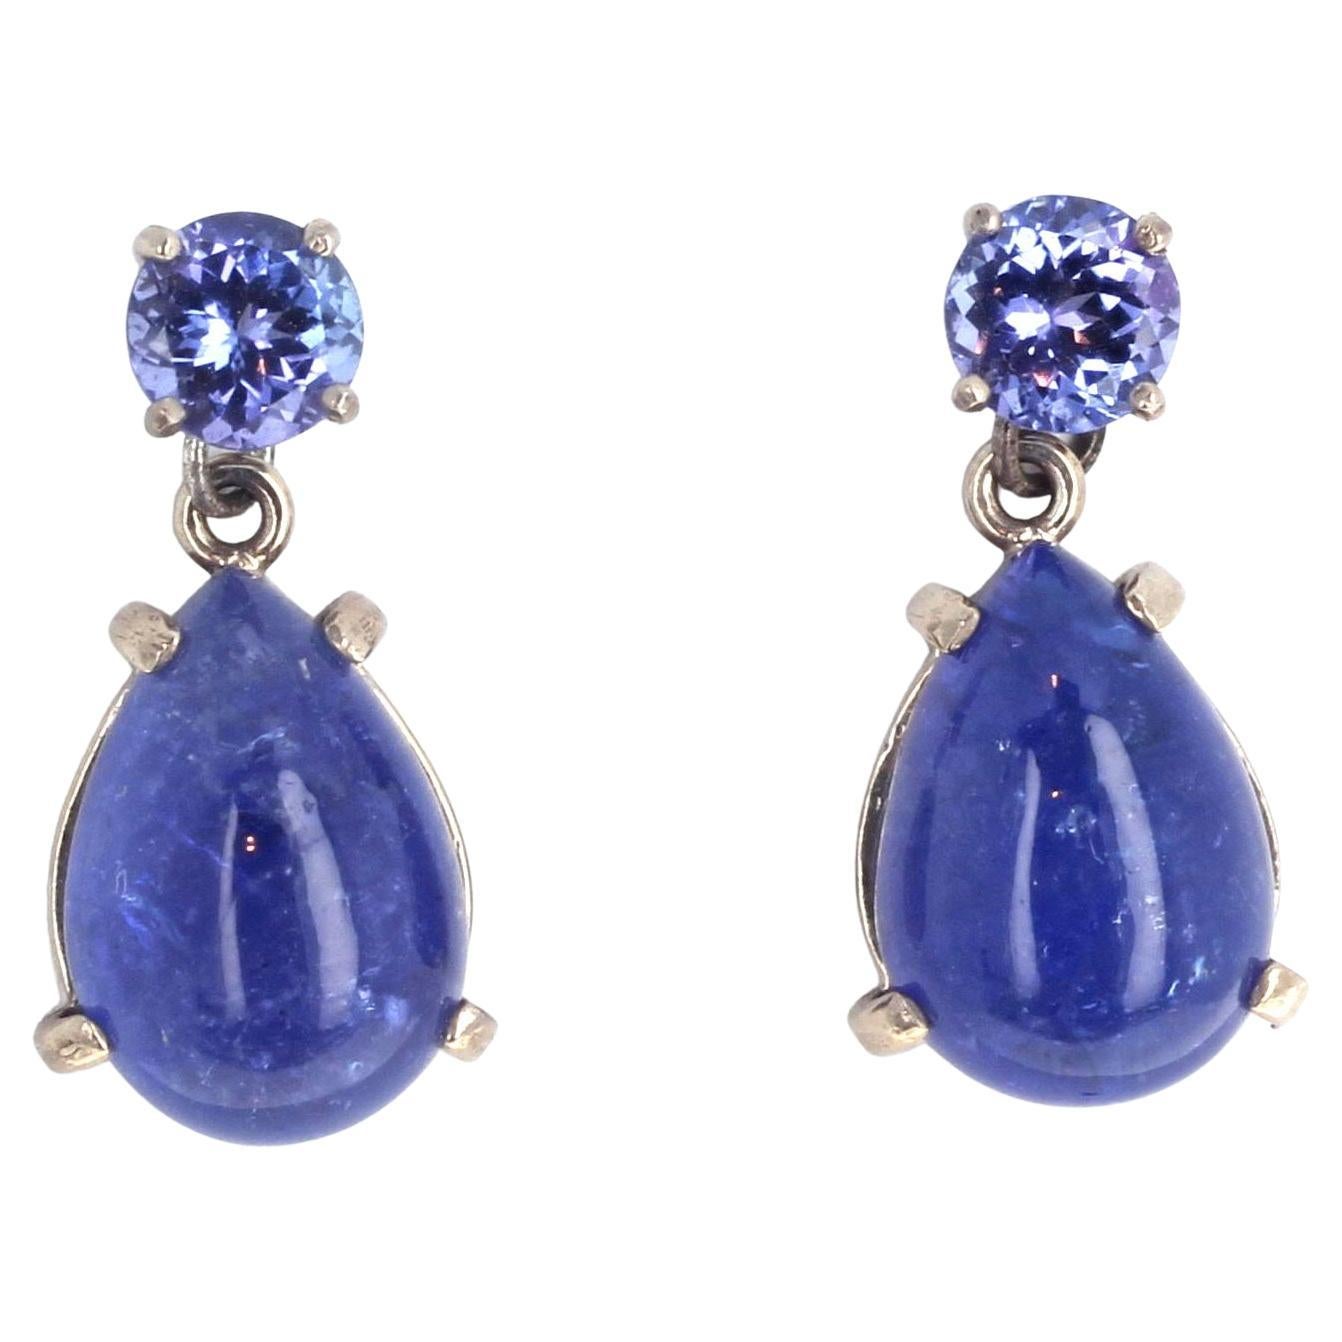 AJD Gorgeous Natural Blue Tanzanite Gems & Cabochons Stud Earrings